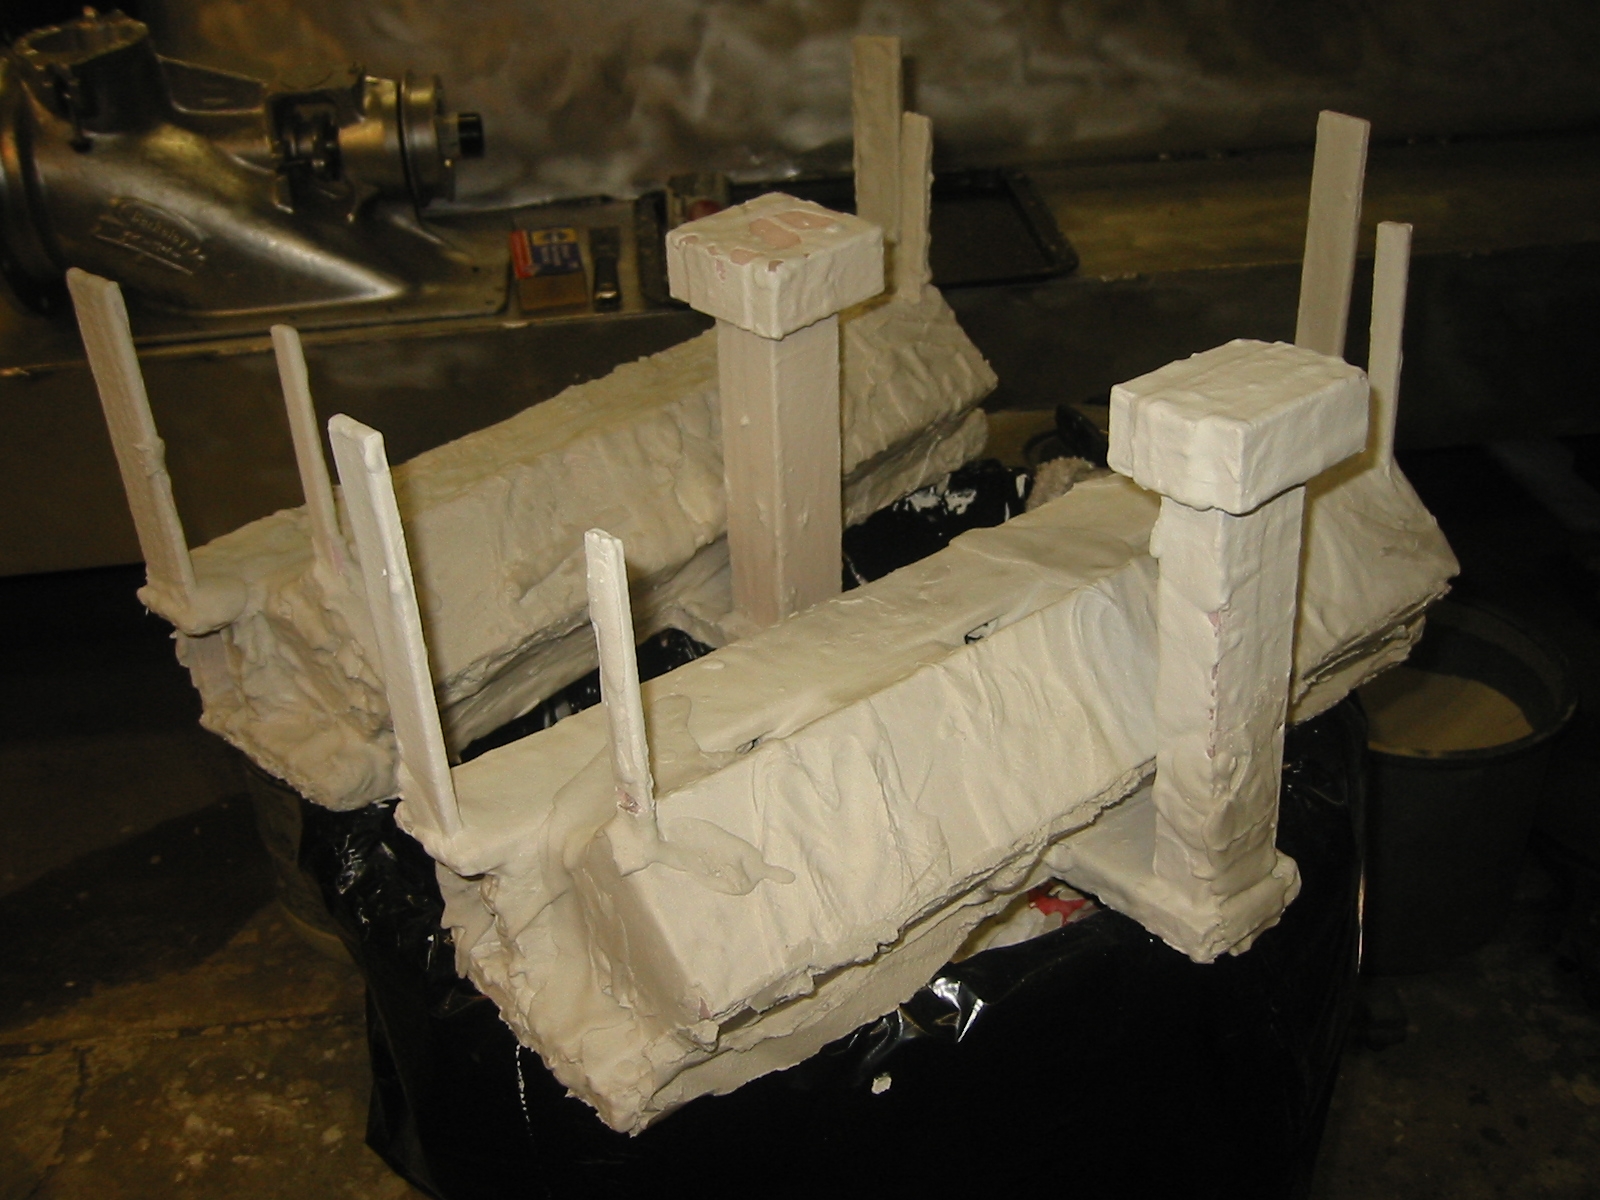 (1) Plaster and silica investment applied to exhaust manifolds.